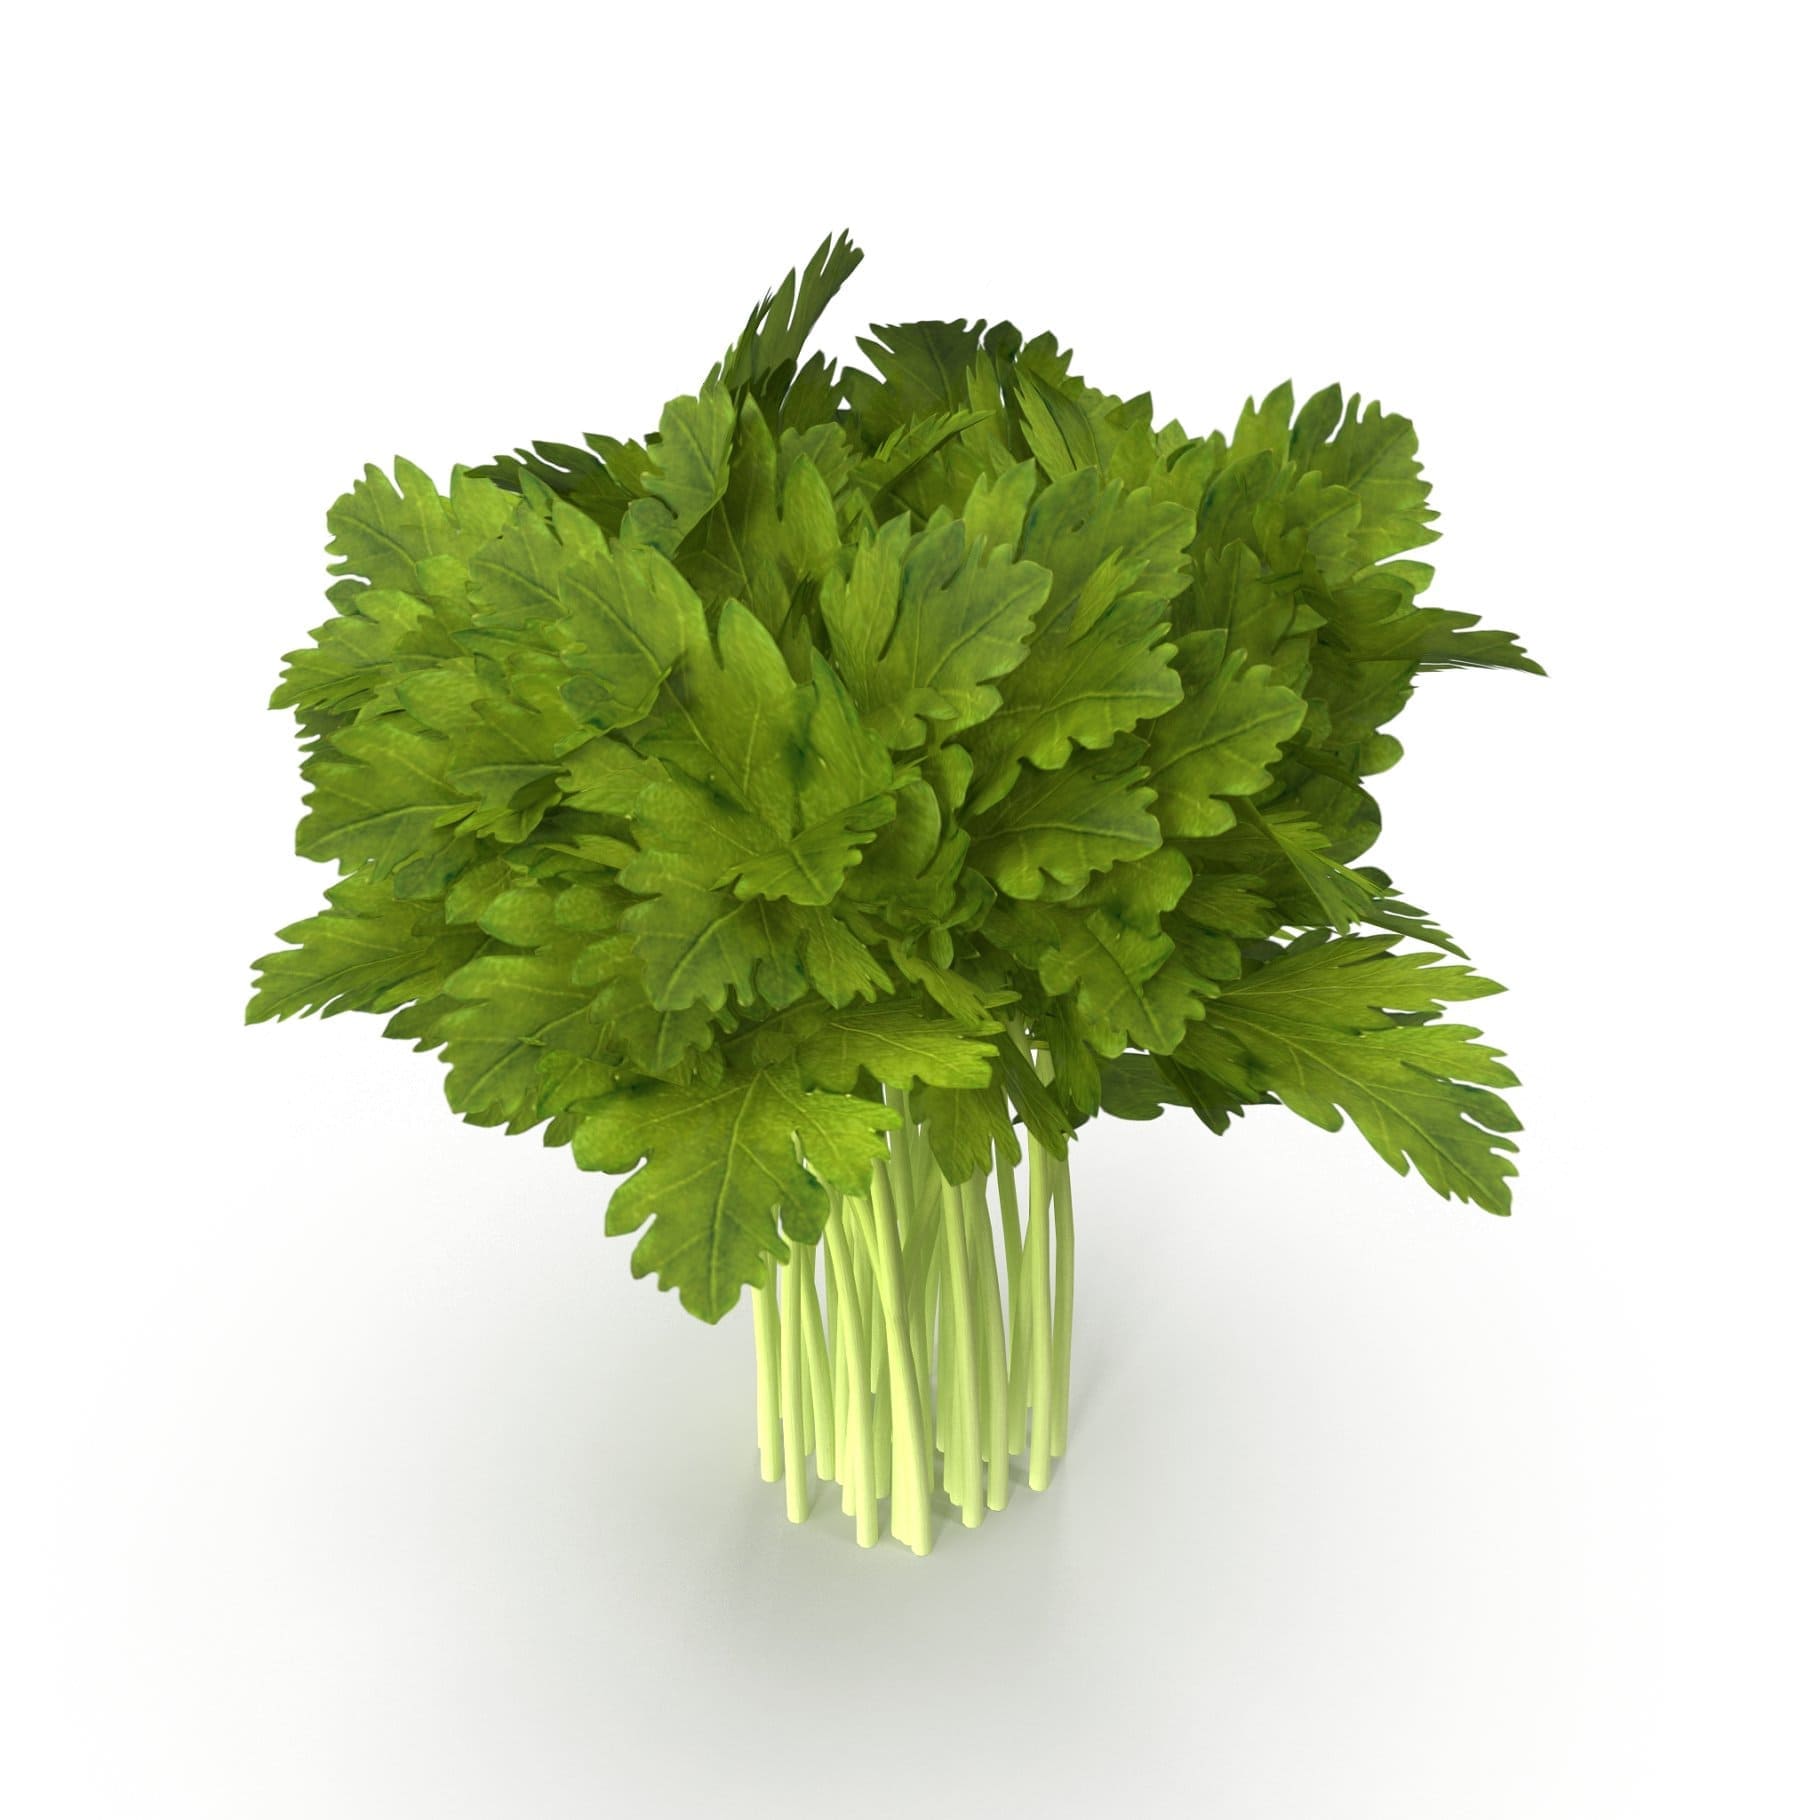 Large celery leaves in a bunch.